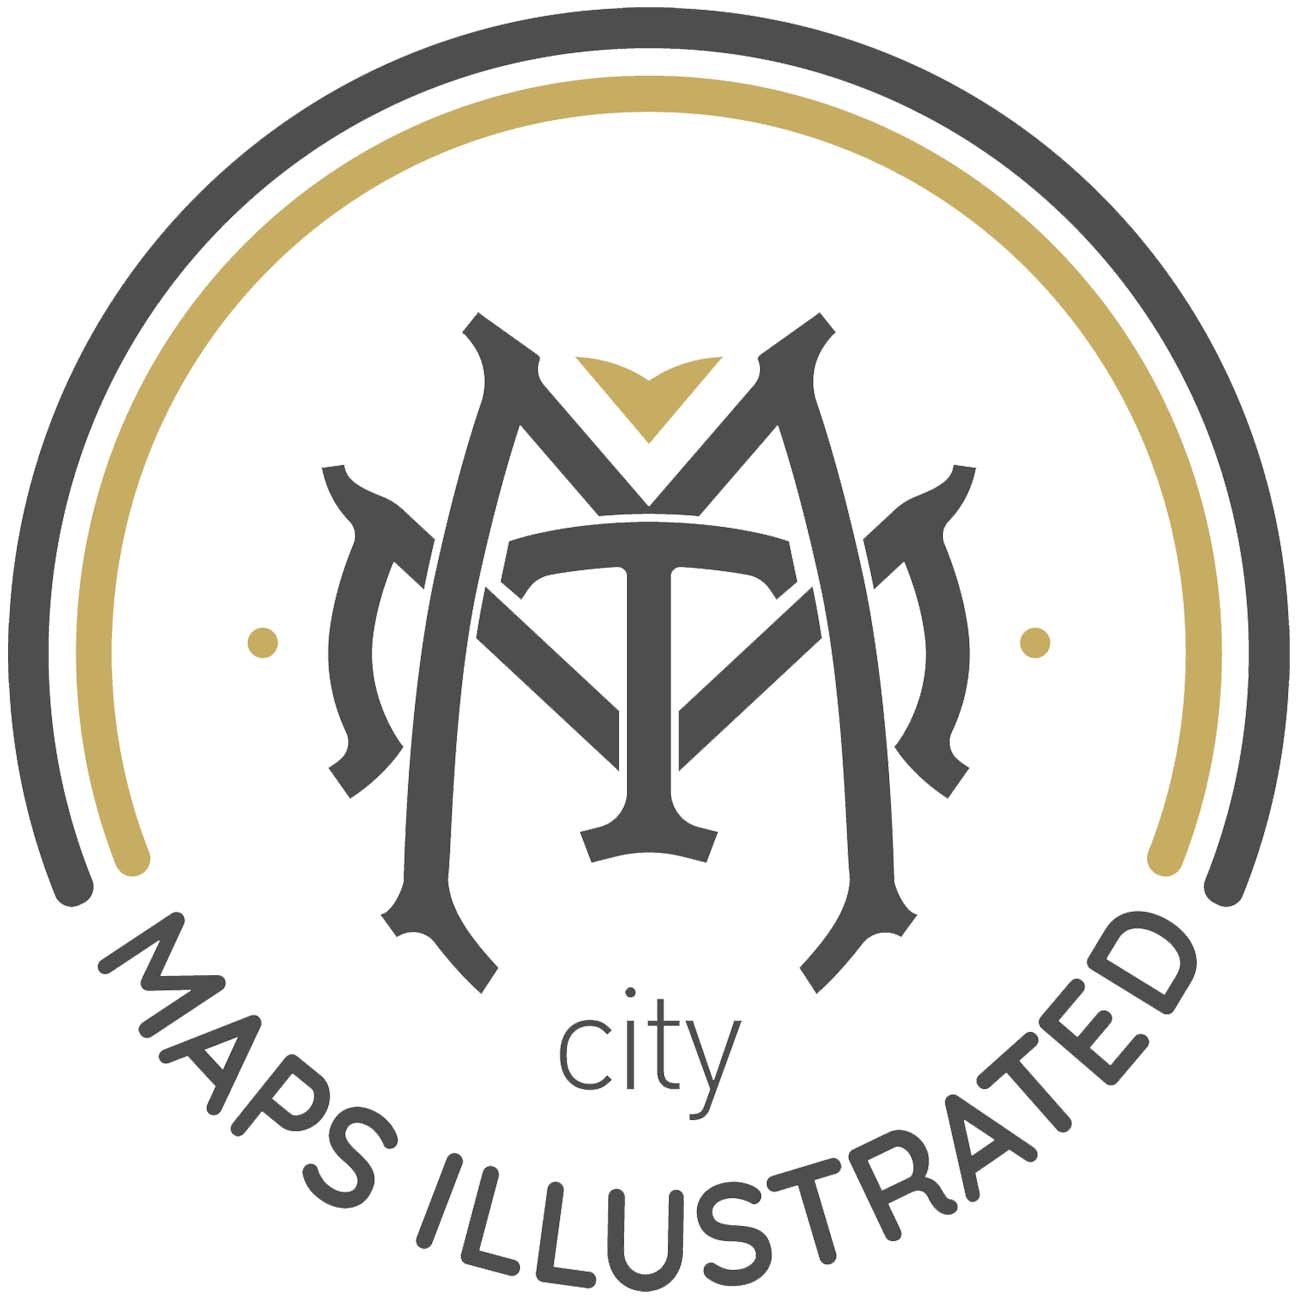 City Maps Illustrated